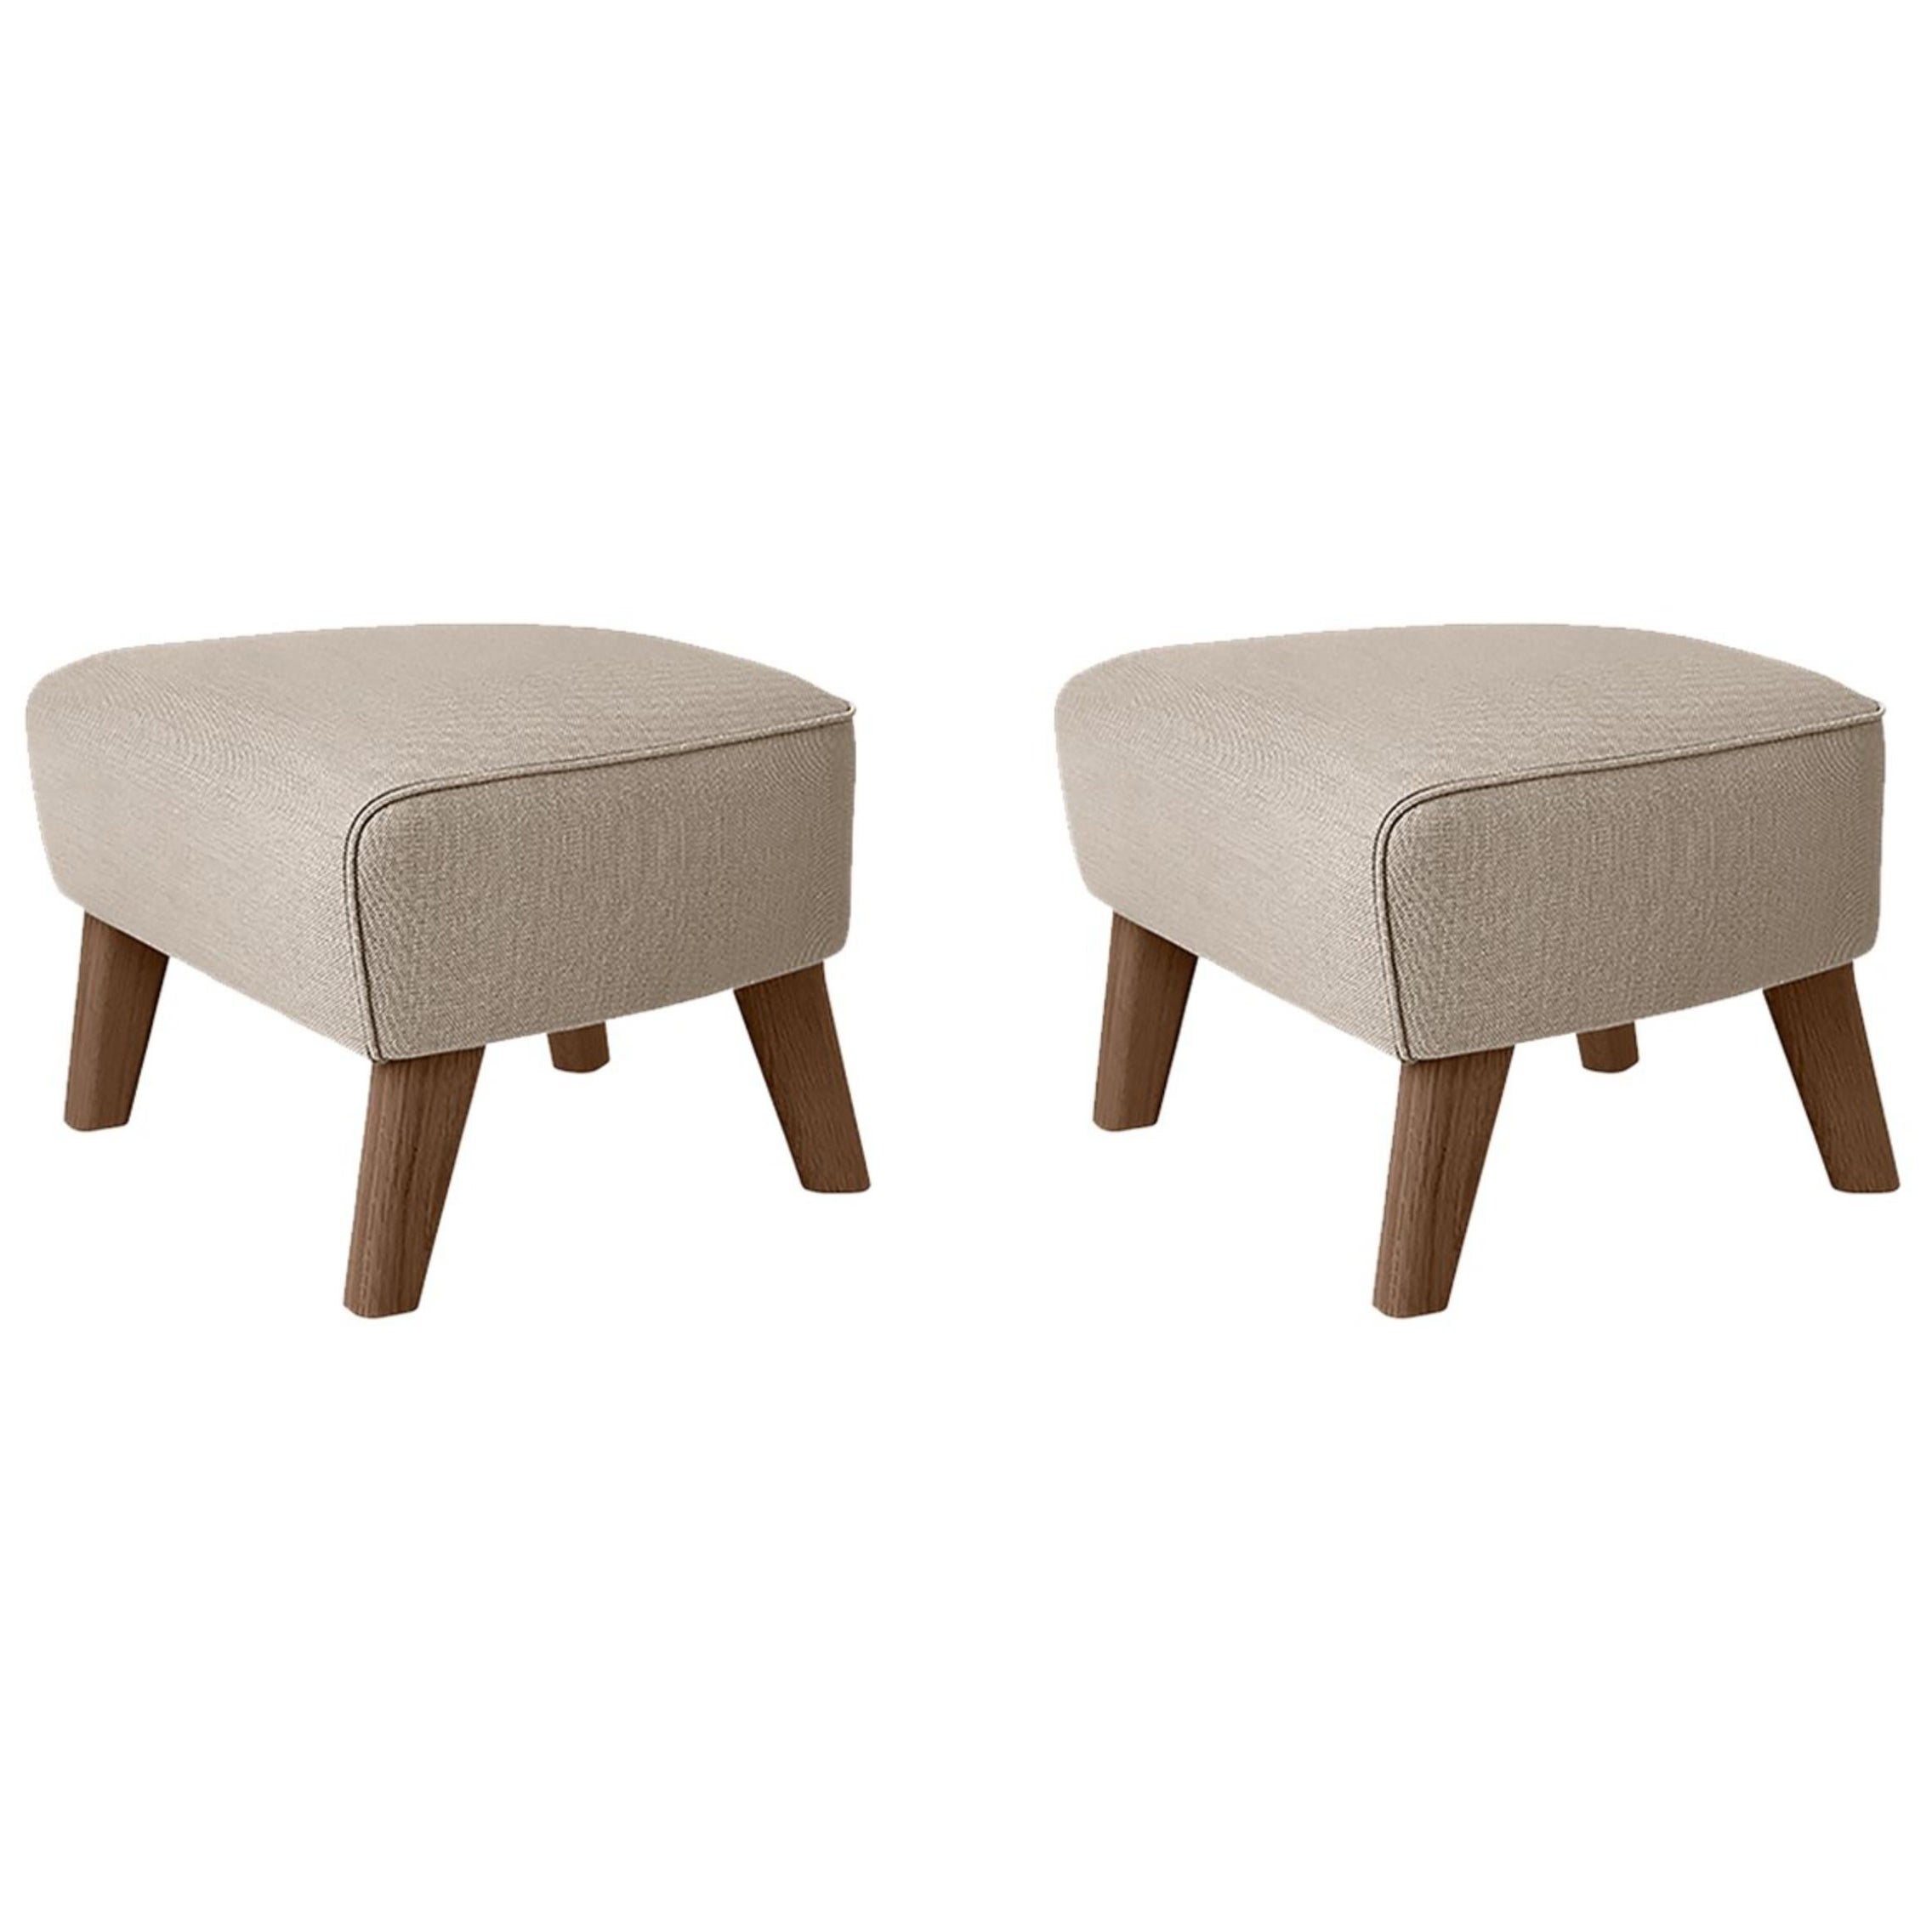 Set of 2 Beige and Smoked Oak Sahco Zero Footstool by Lassen For Sale